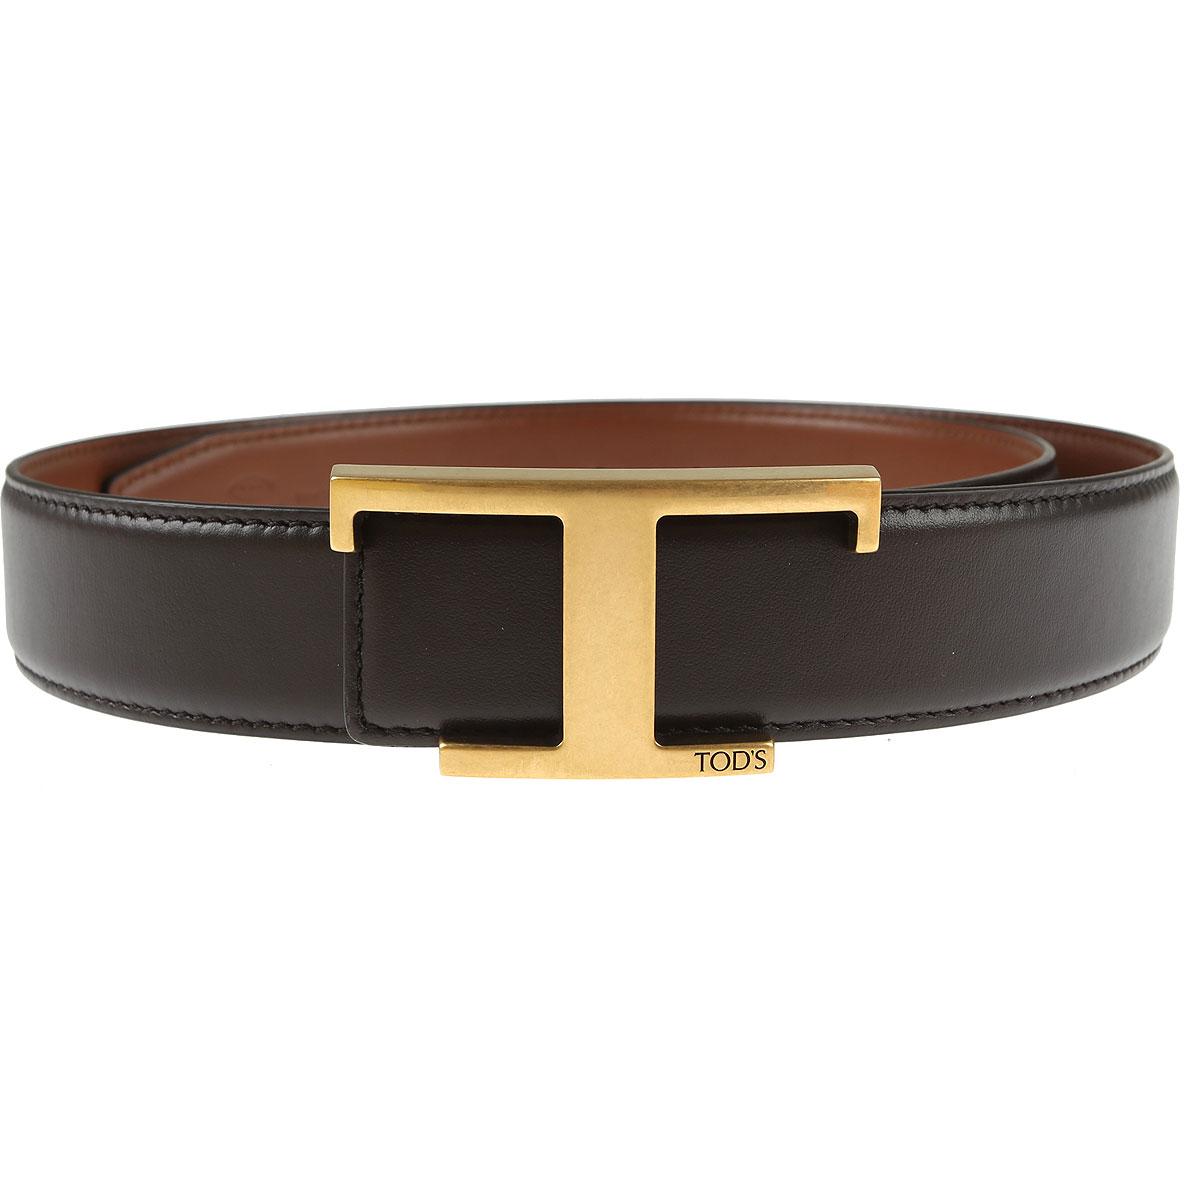 Mens Belts Tods, Style code: xcmcqr51100ndd2p42--